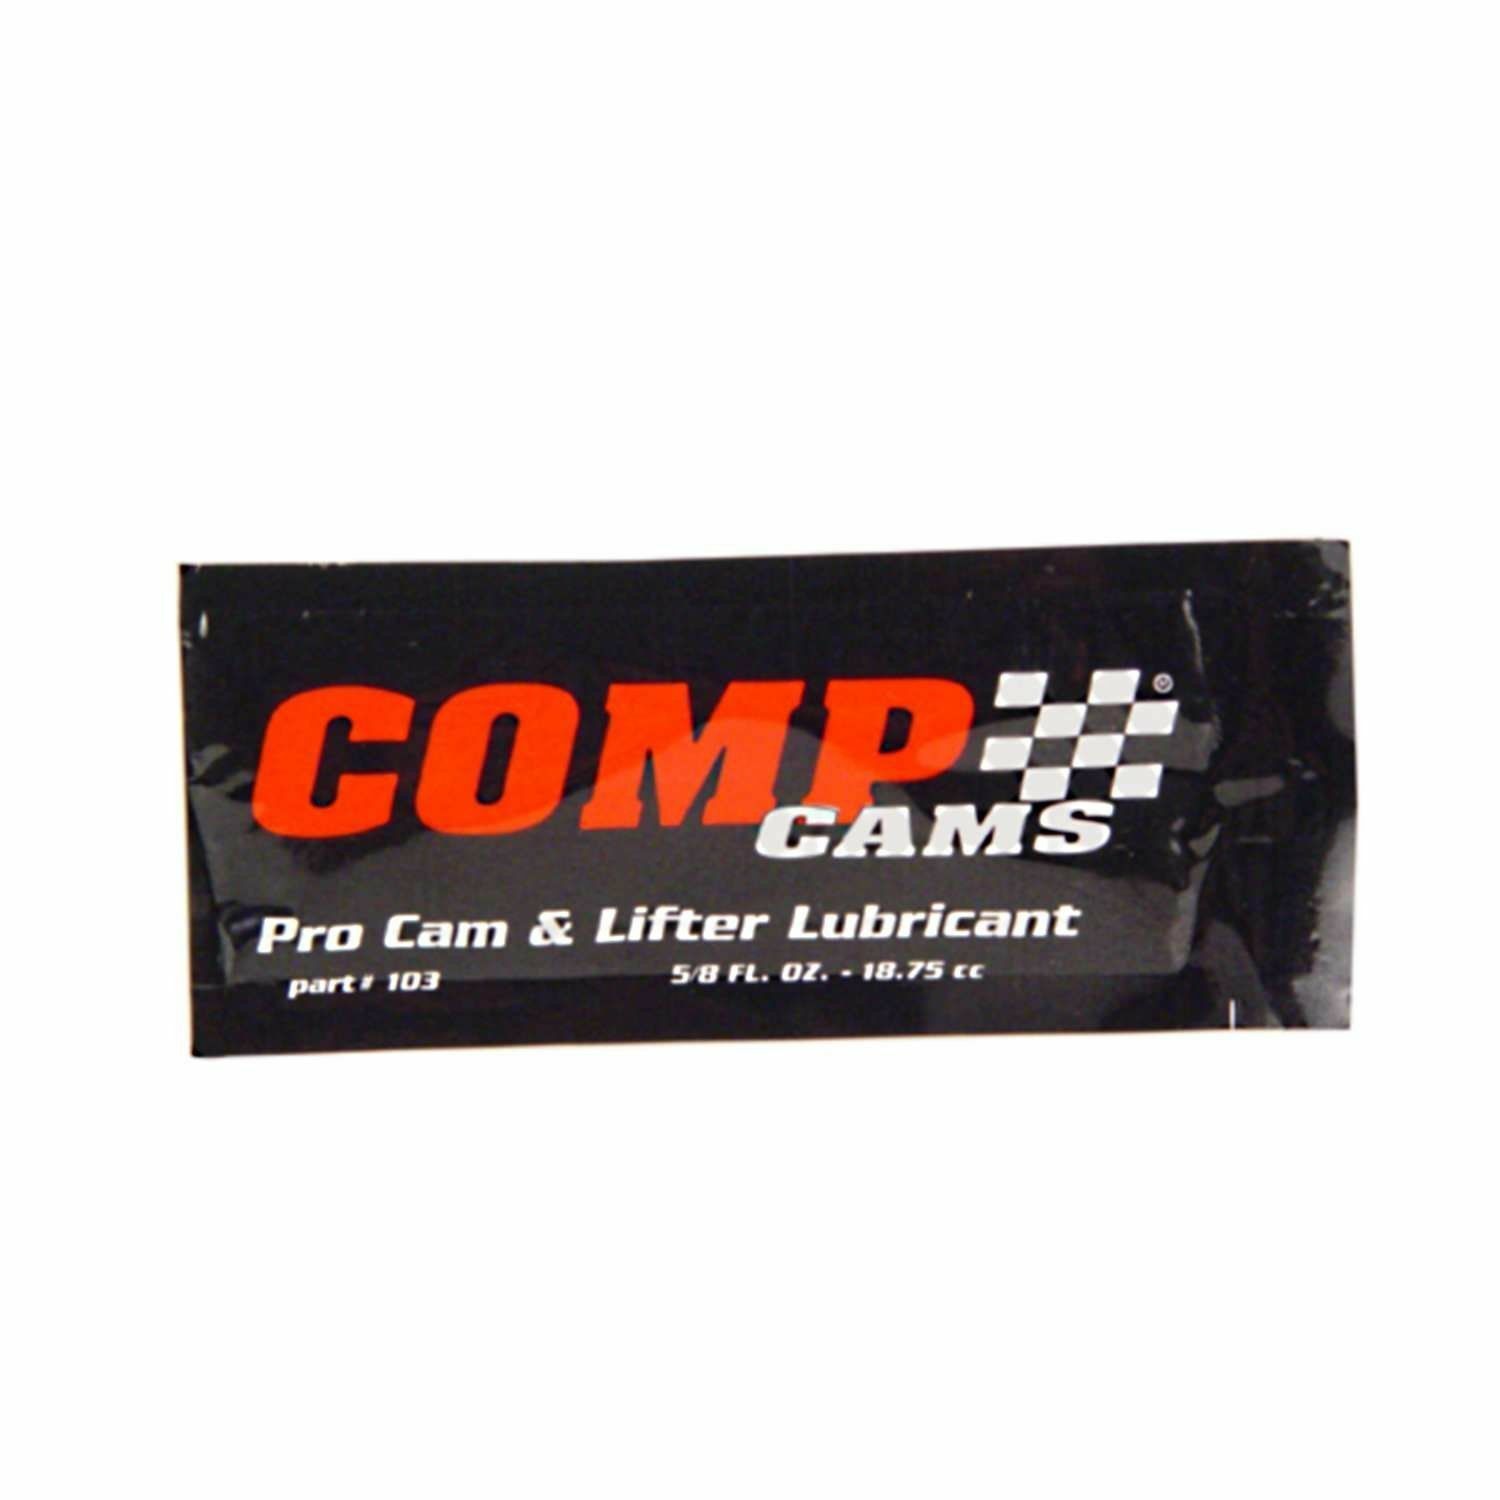 Comp Cams 103 Camshaft & Lifters Break-in Install Lube Lubricant